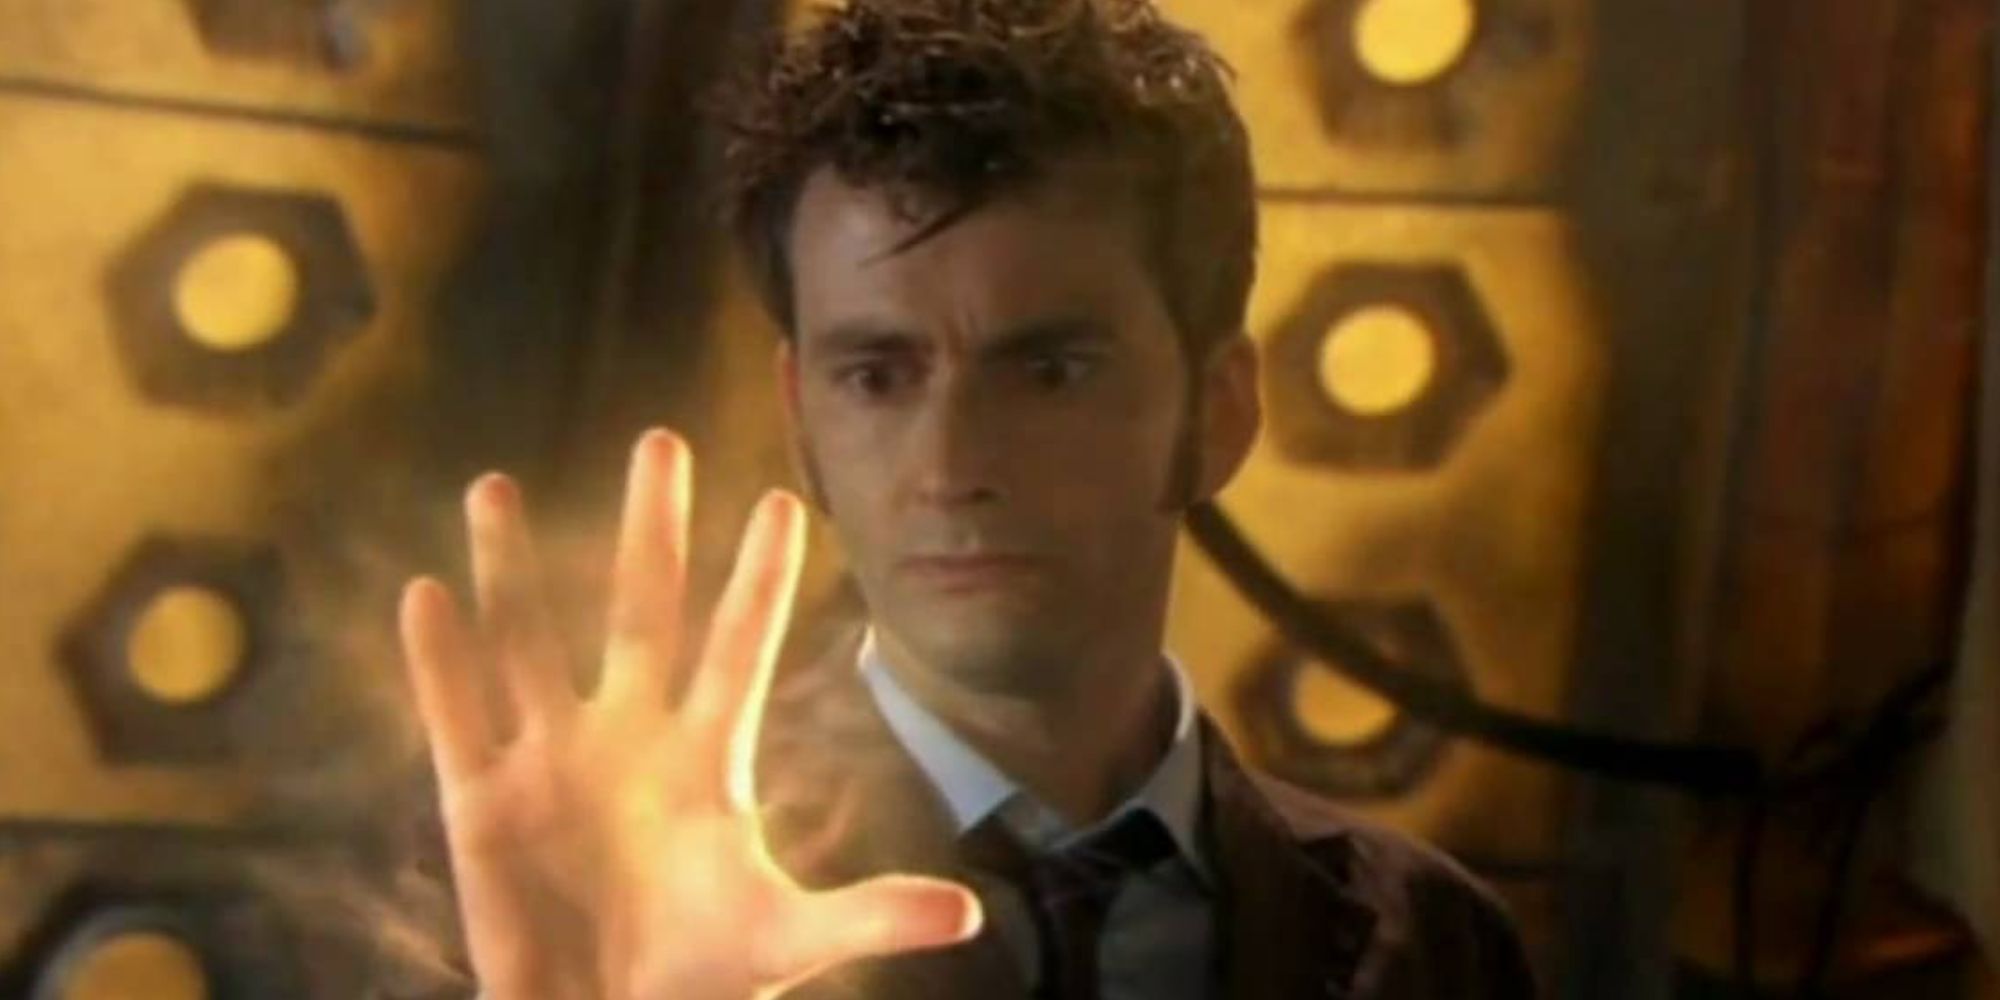 David Tennant as the Tenth Doctor staring at his glowing hand